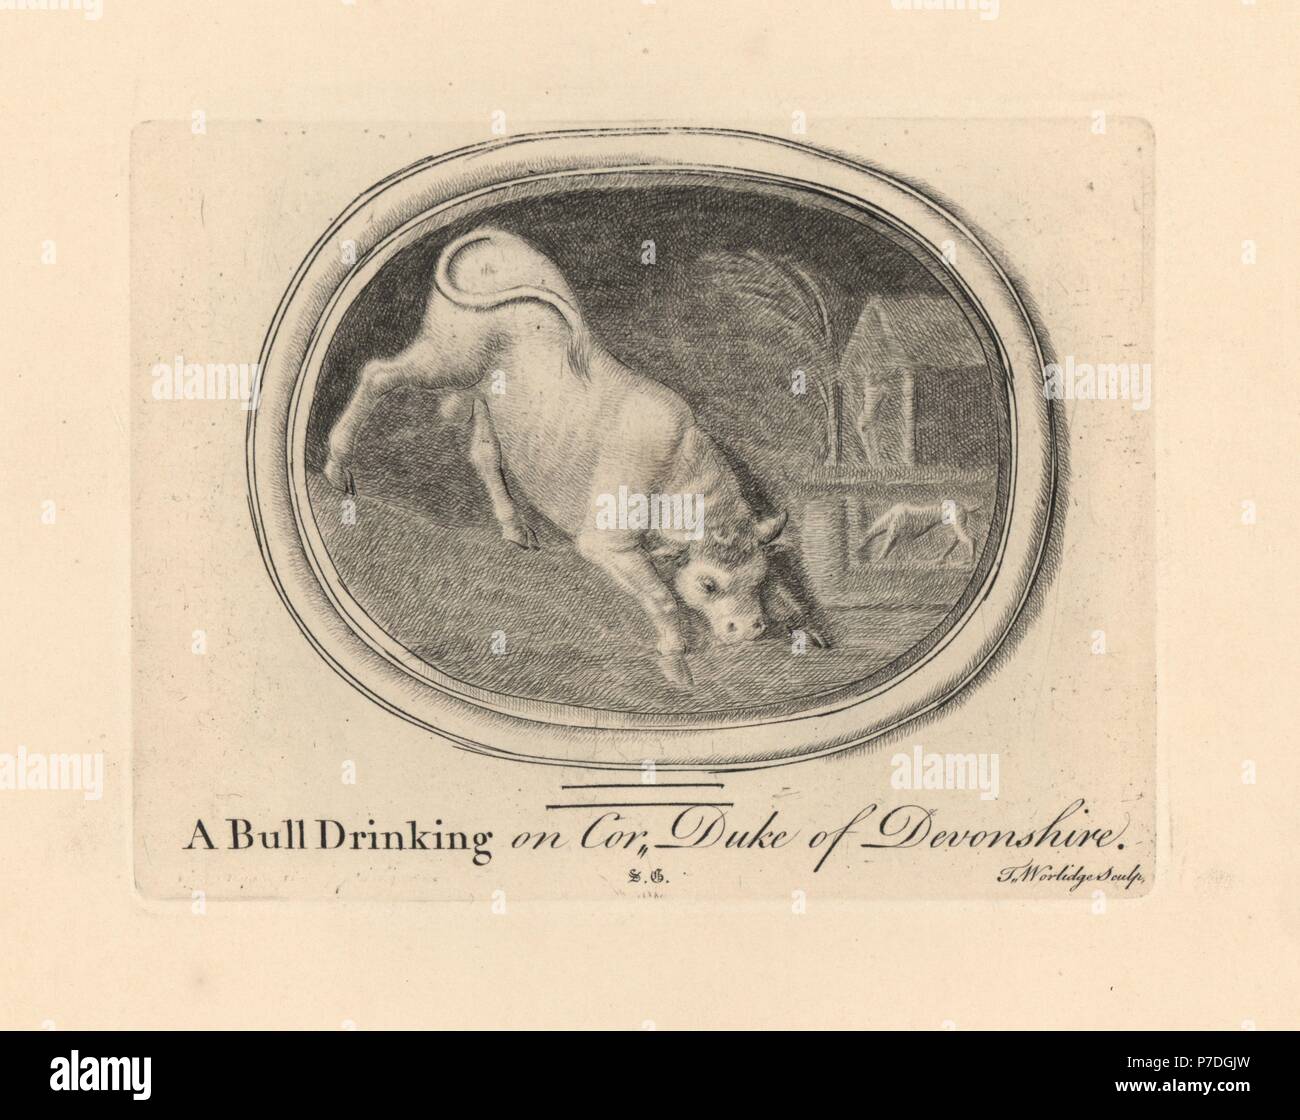 Carving of a bull drinking, on cornelian from the Duke of Devonshire's collection. Copperplate engraving by Thomas Worlidge from James Vallentin's One Hundred and Eight Engravings from Antique Gems, 1863. Stock Photo